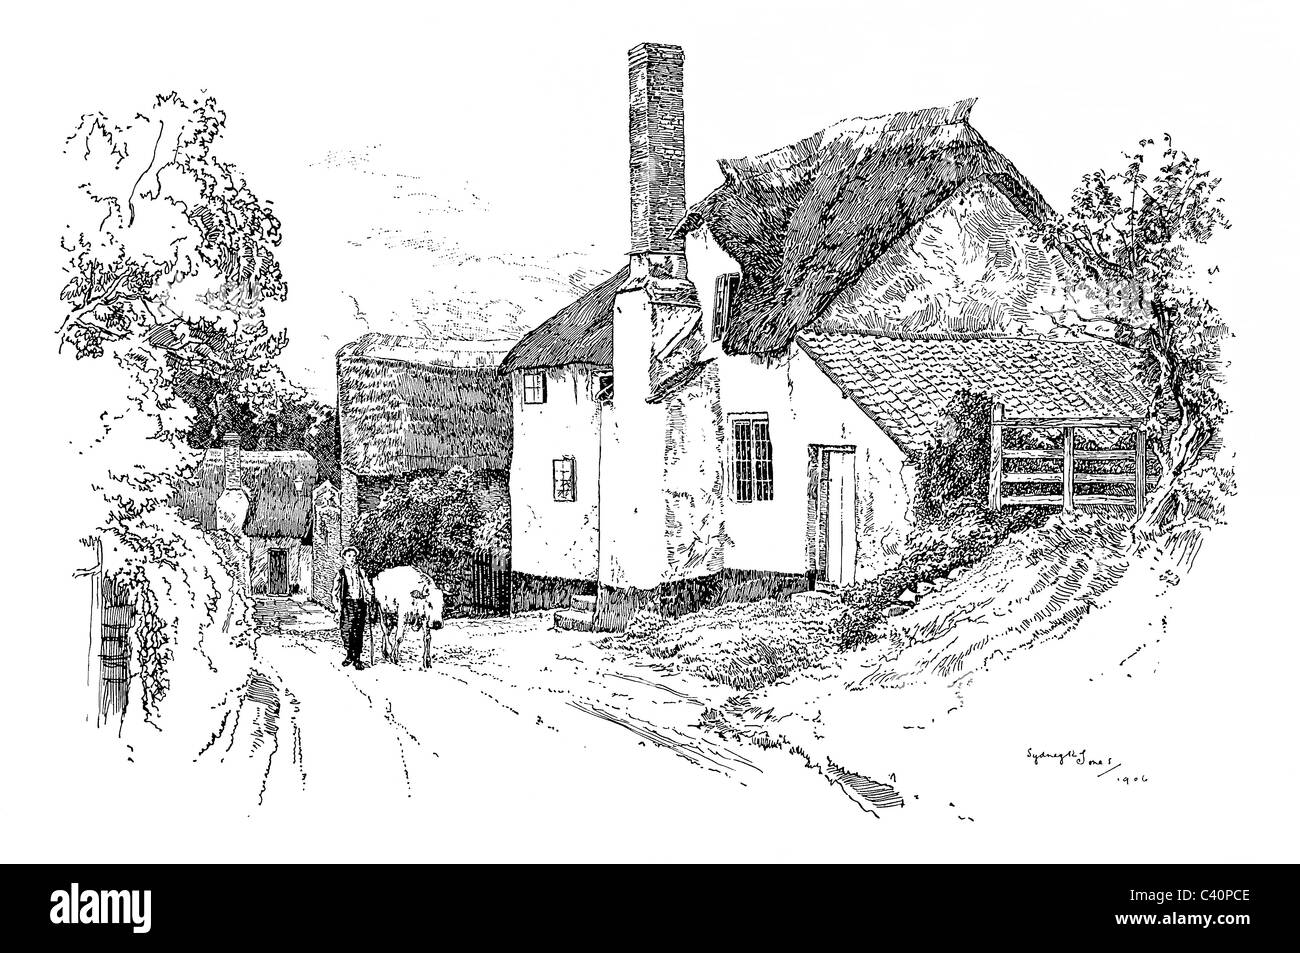 Minehead, Somerset - pen and ink illustration from 'Old English Country Cottages' by Charles Holme, 1906. Stock Photo